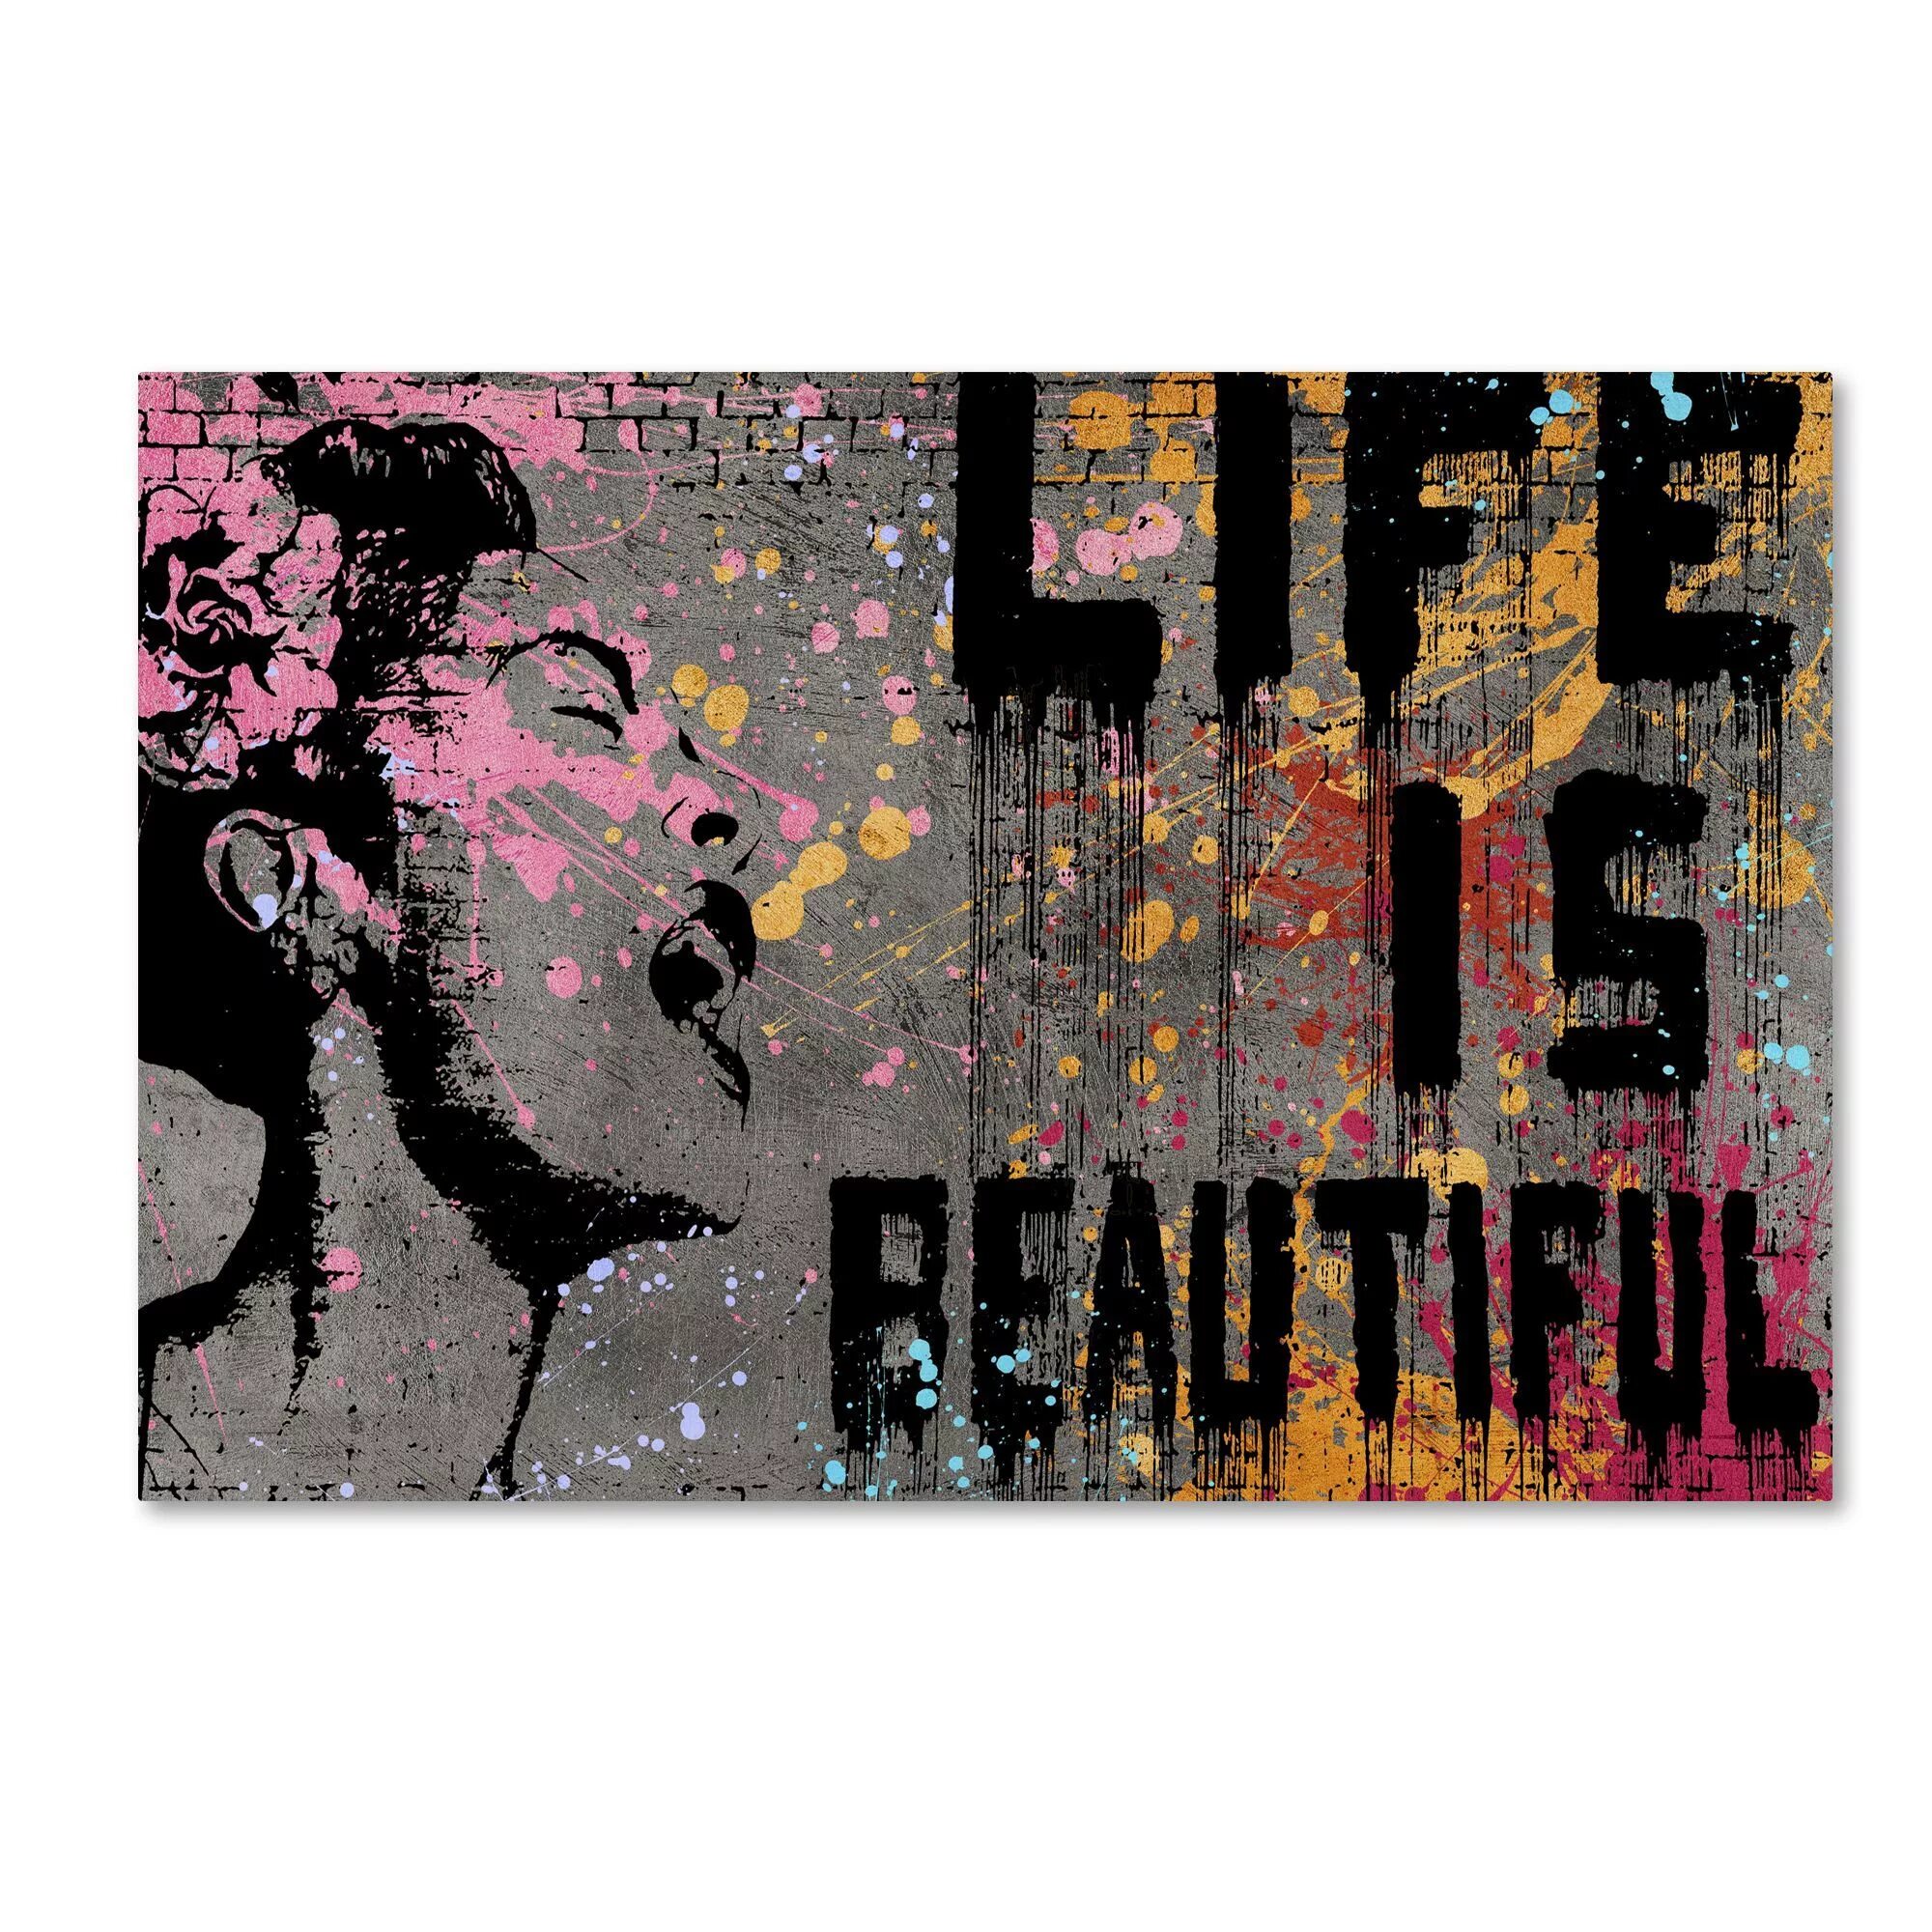 Titles are life. Life is beautiful Бэнкси. Граффити Life is beautiful. Бэнкси плакаты. Картина Art you Life.